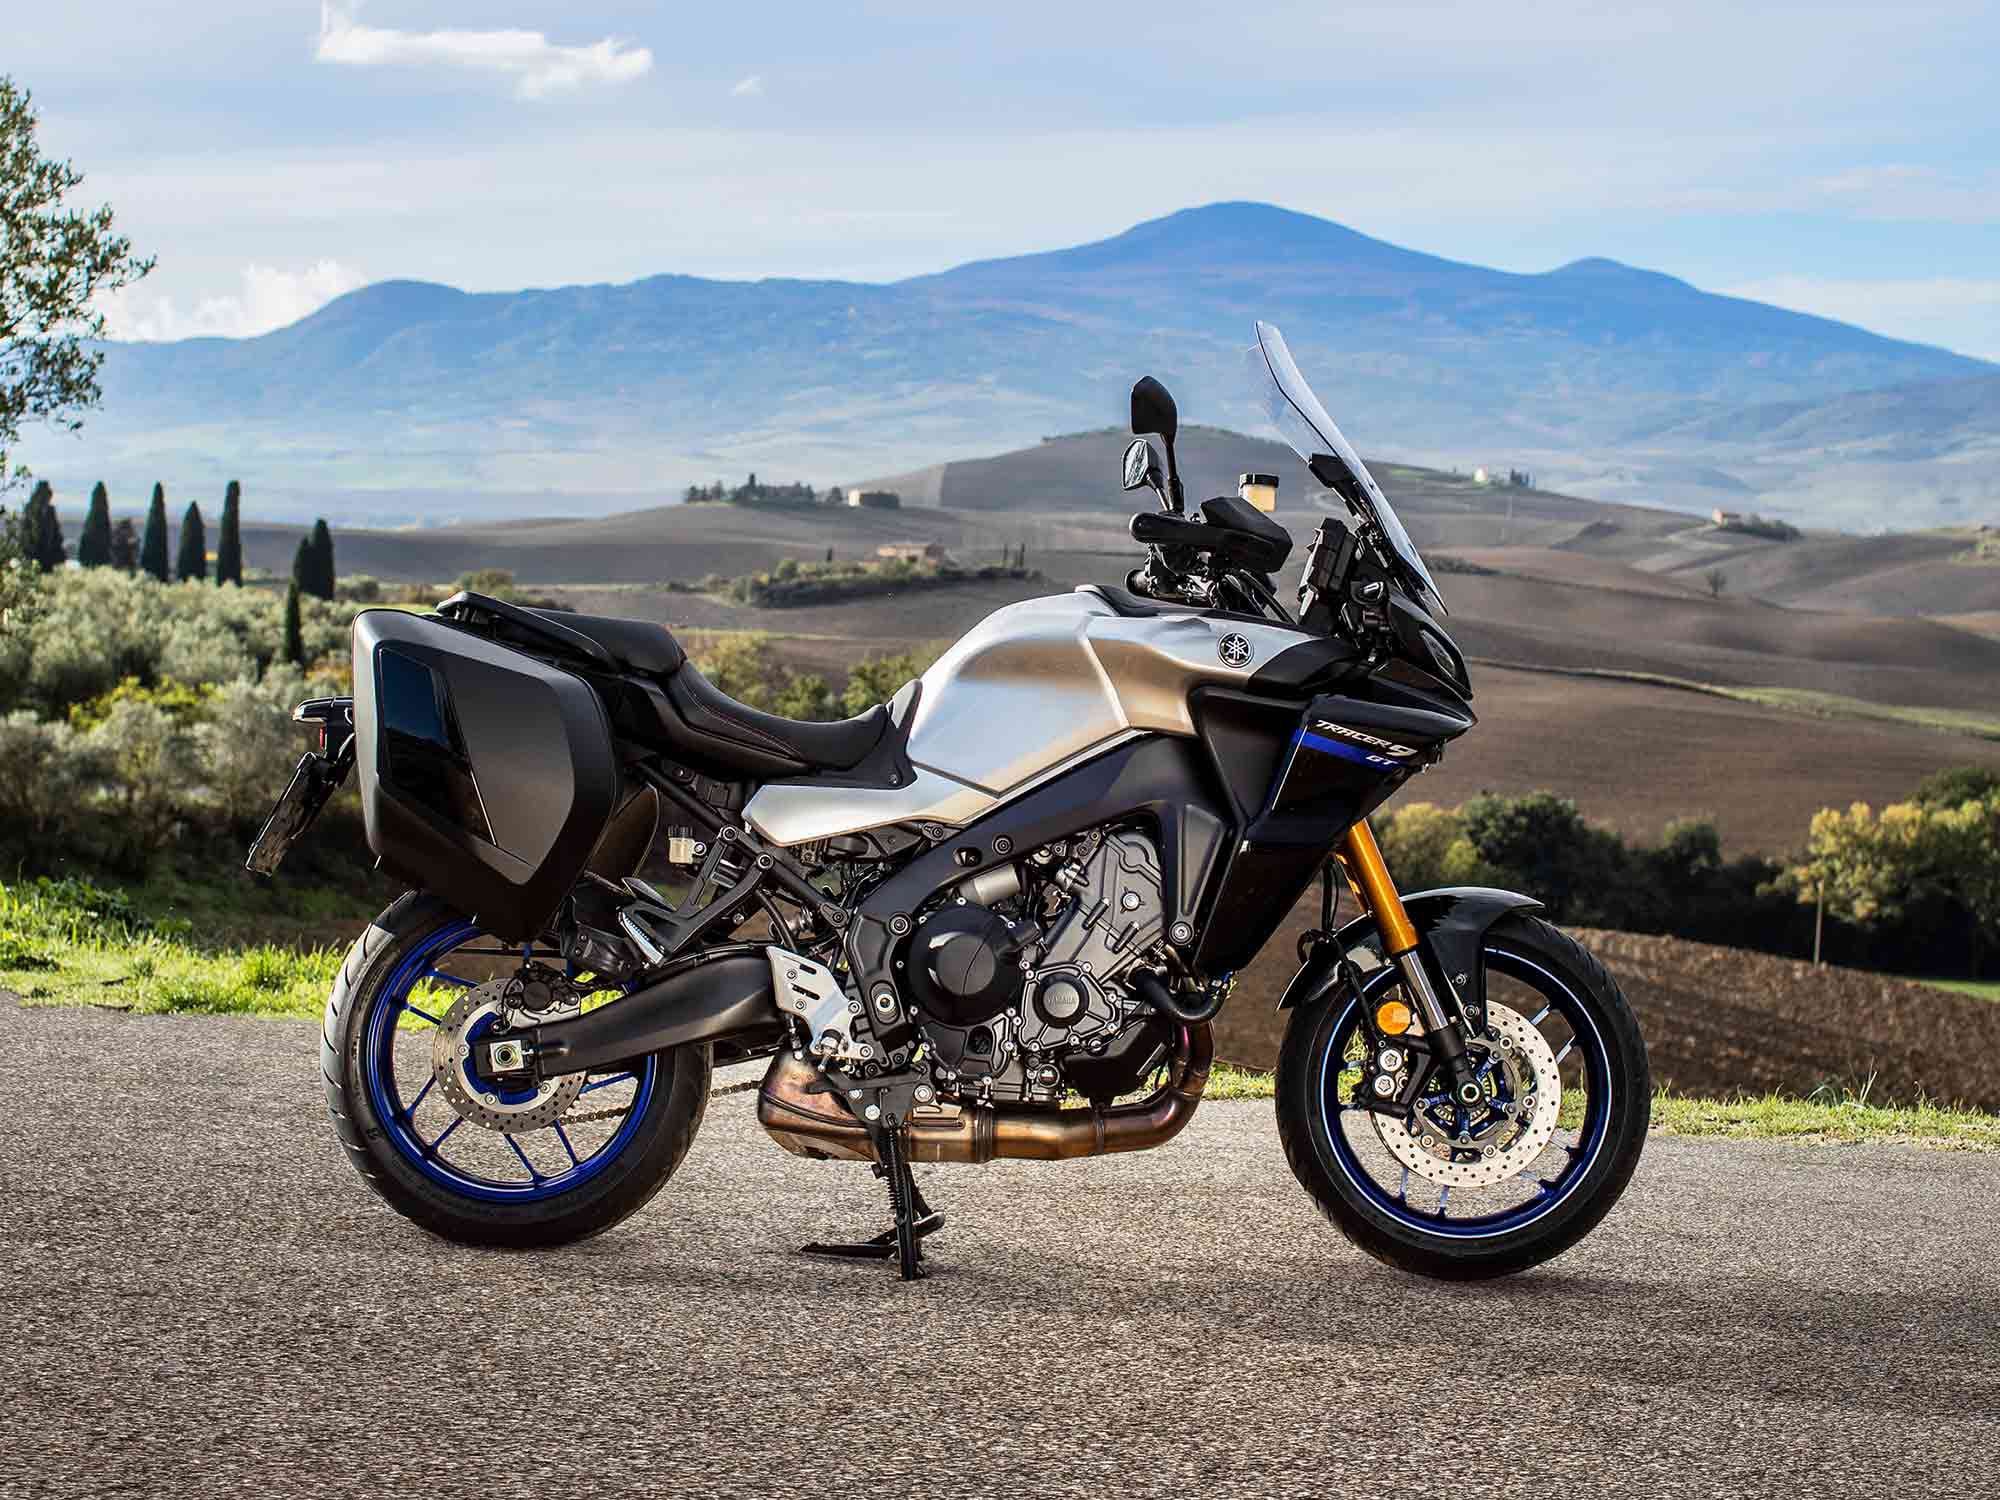 Evolution is the name of the game with the 2022 Yamaha Tracer 9 GT; why wouldn’t you want a lightweight, nimble tourer with just the right power?